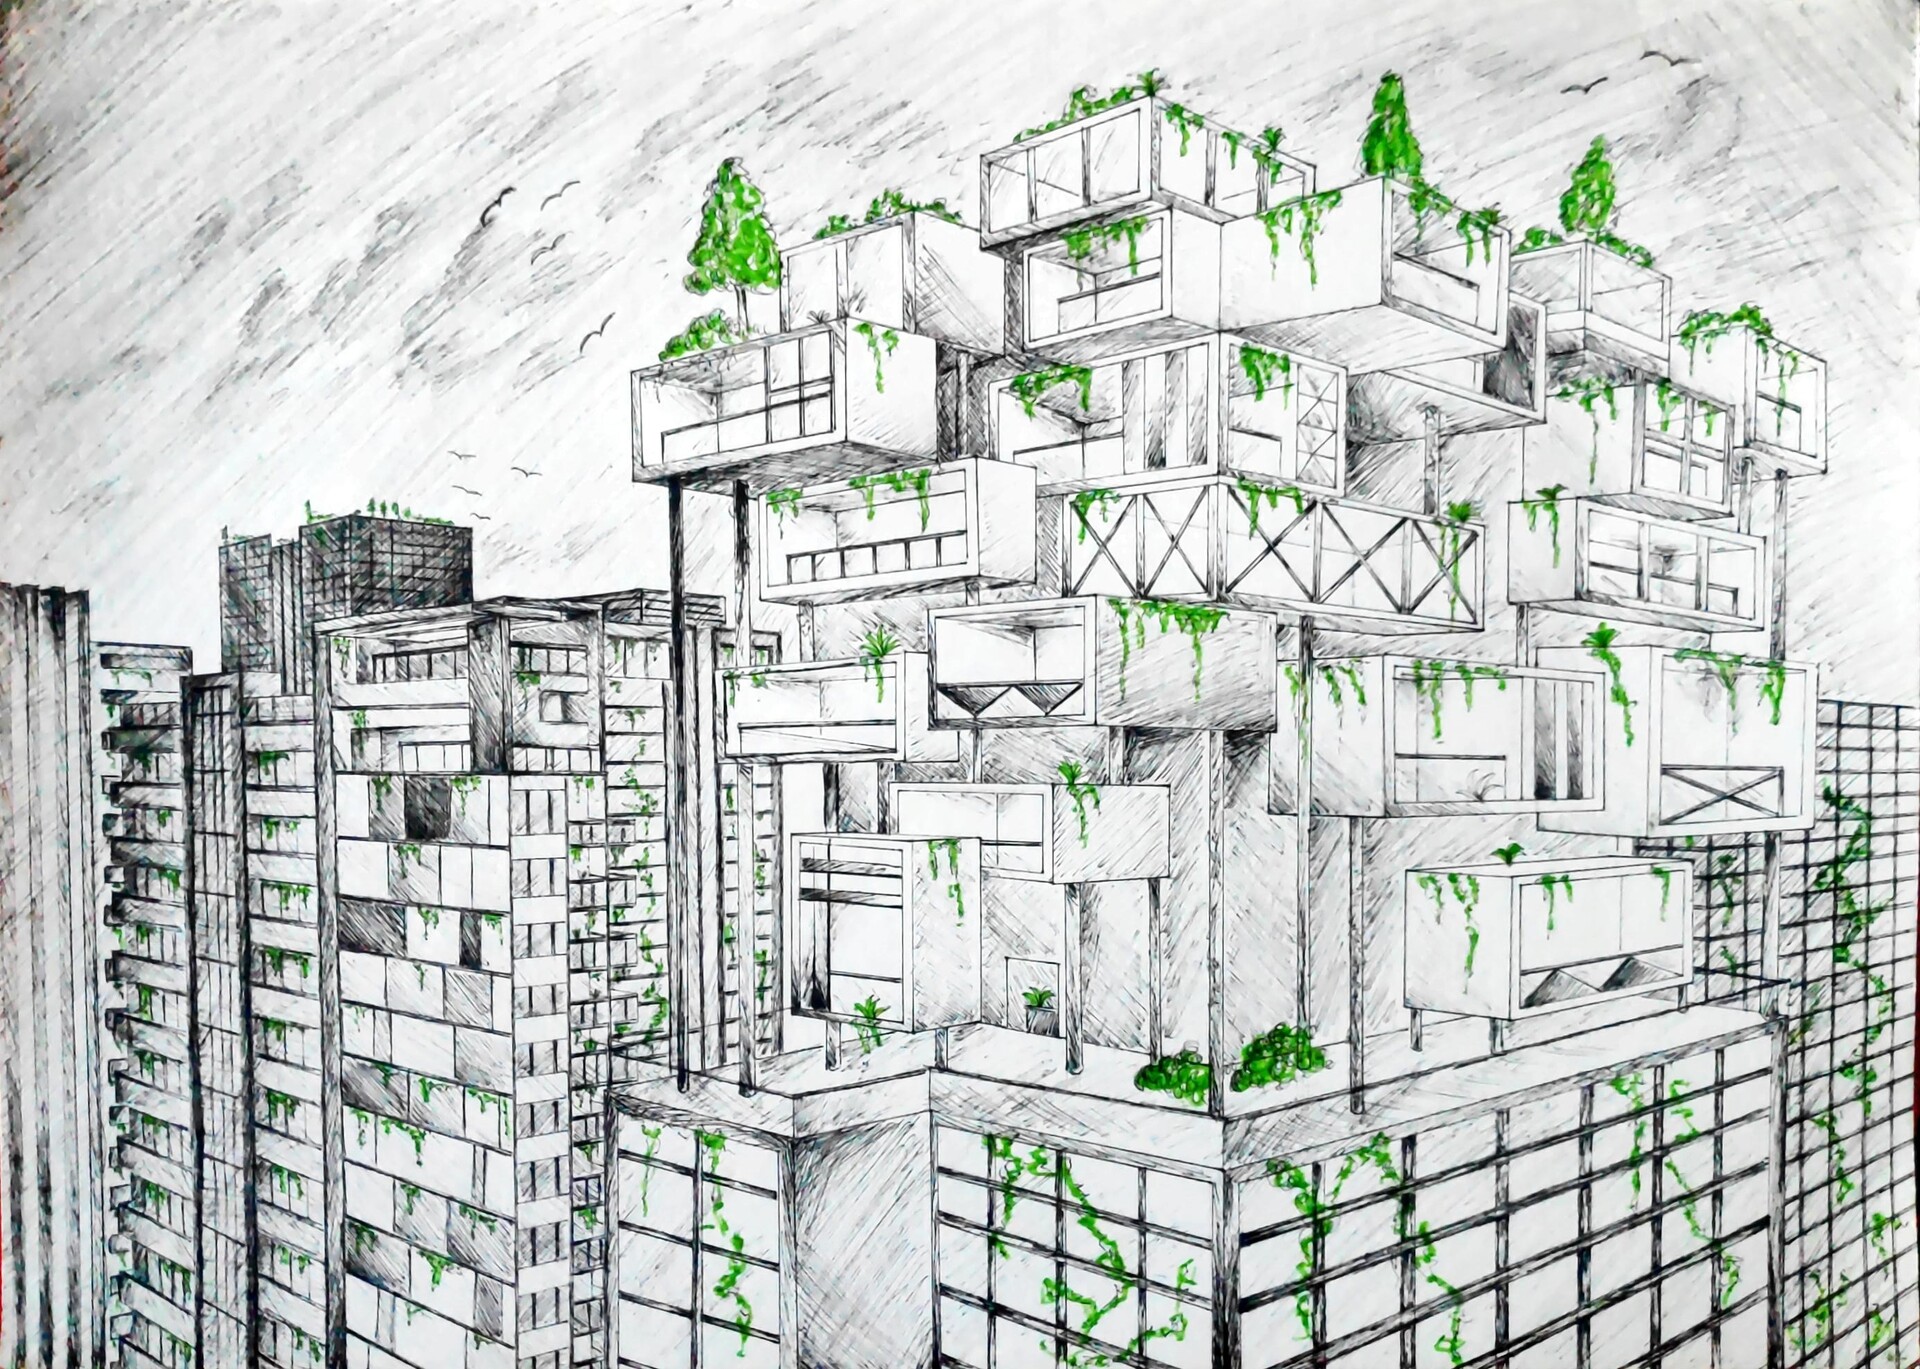 Clean City Green City Drawing  oil pastel watercolor drawing Sharpie   Clean City Green City Drawing TinyPrintsArt wwwtinyprintsartcom  Stationary Used Drawing book Doms watercolors Doms oil pastels Sharpie  Online  By